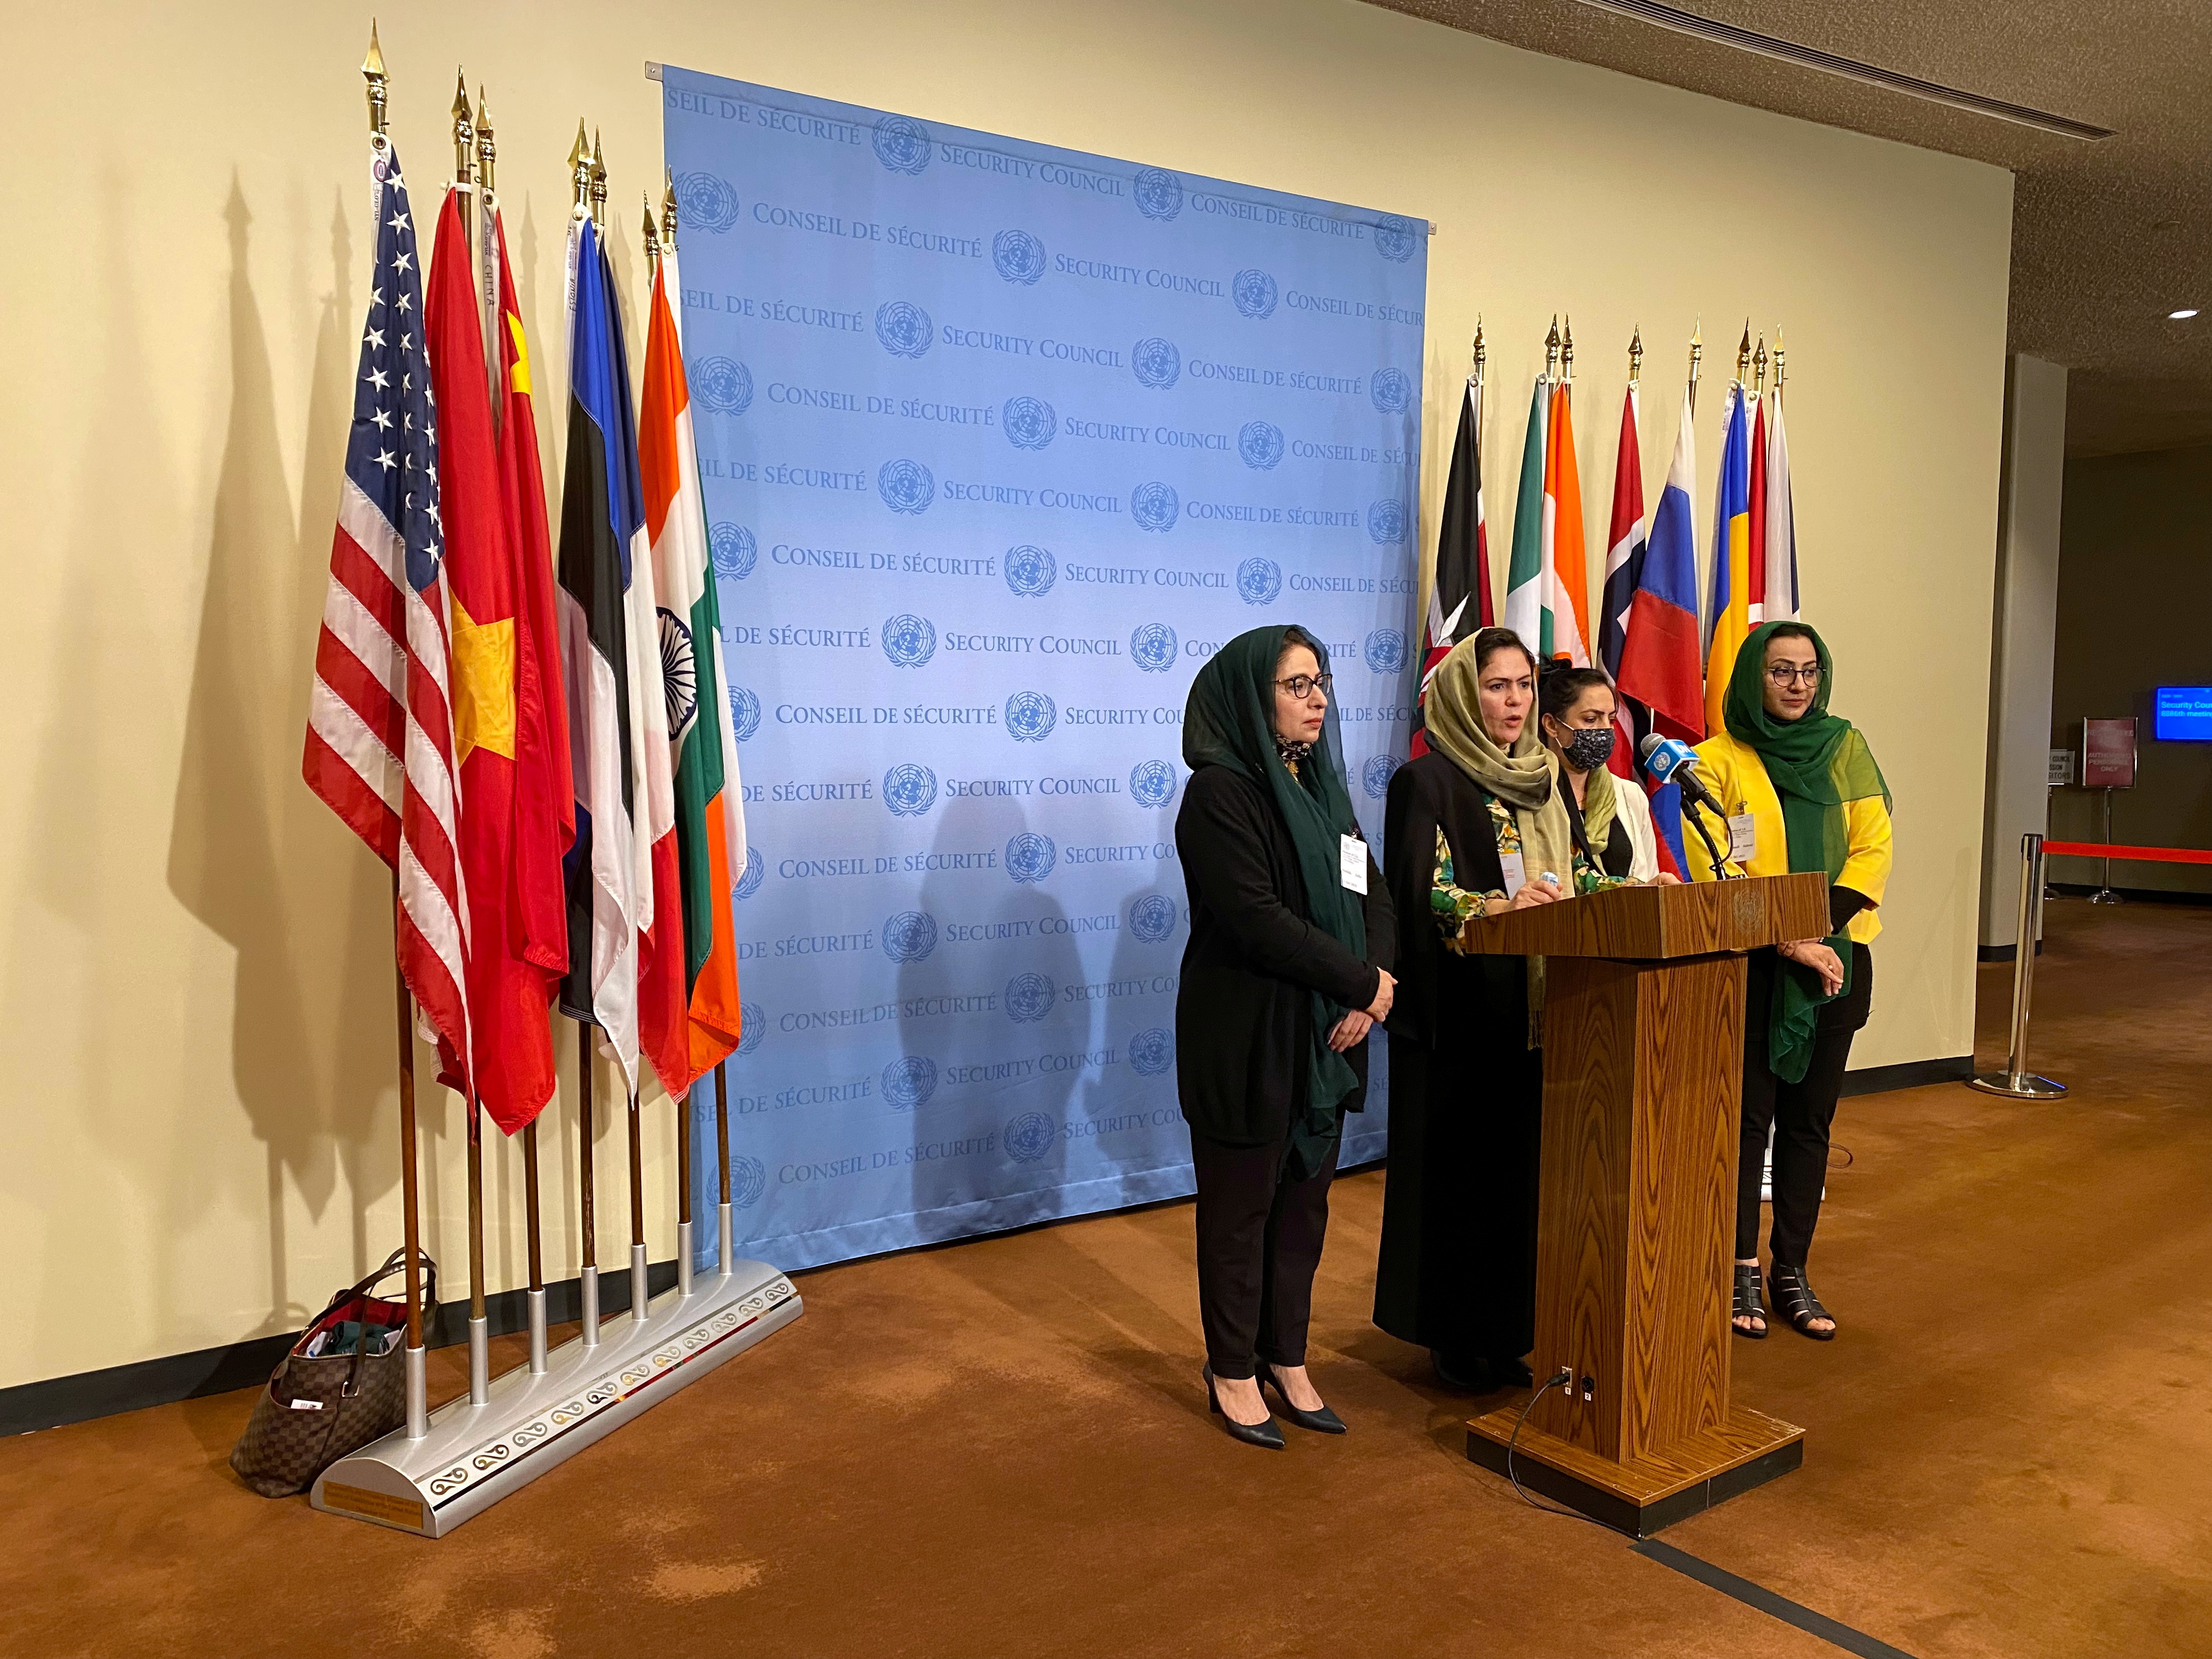 Left to right: Former Afghan diplomat Asila Wardak, former Afghan politician and peace negotiator Fawzia Koofi, Afghan journalist Anisa Shaheed and former Afghan politician, Naheed Fareed speak to reporters outside the U.N. Security Council, in New York, U.S. October 21, 2021. REUTERS/Michelle Nichols